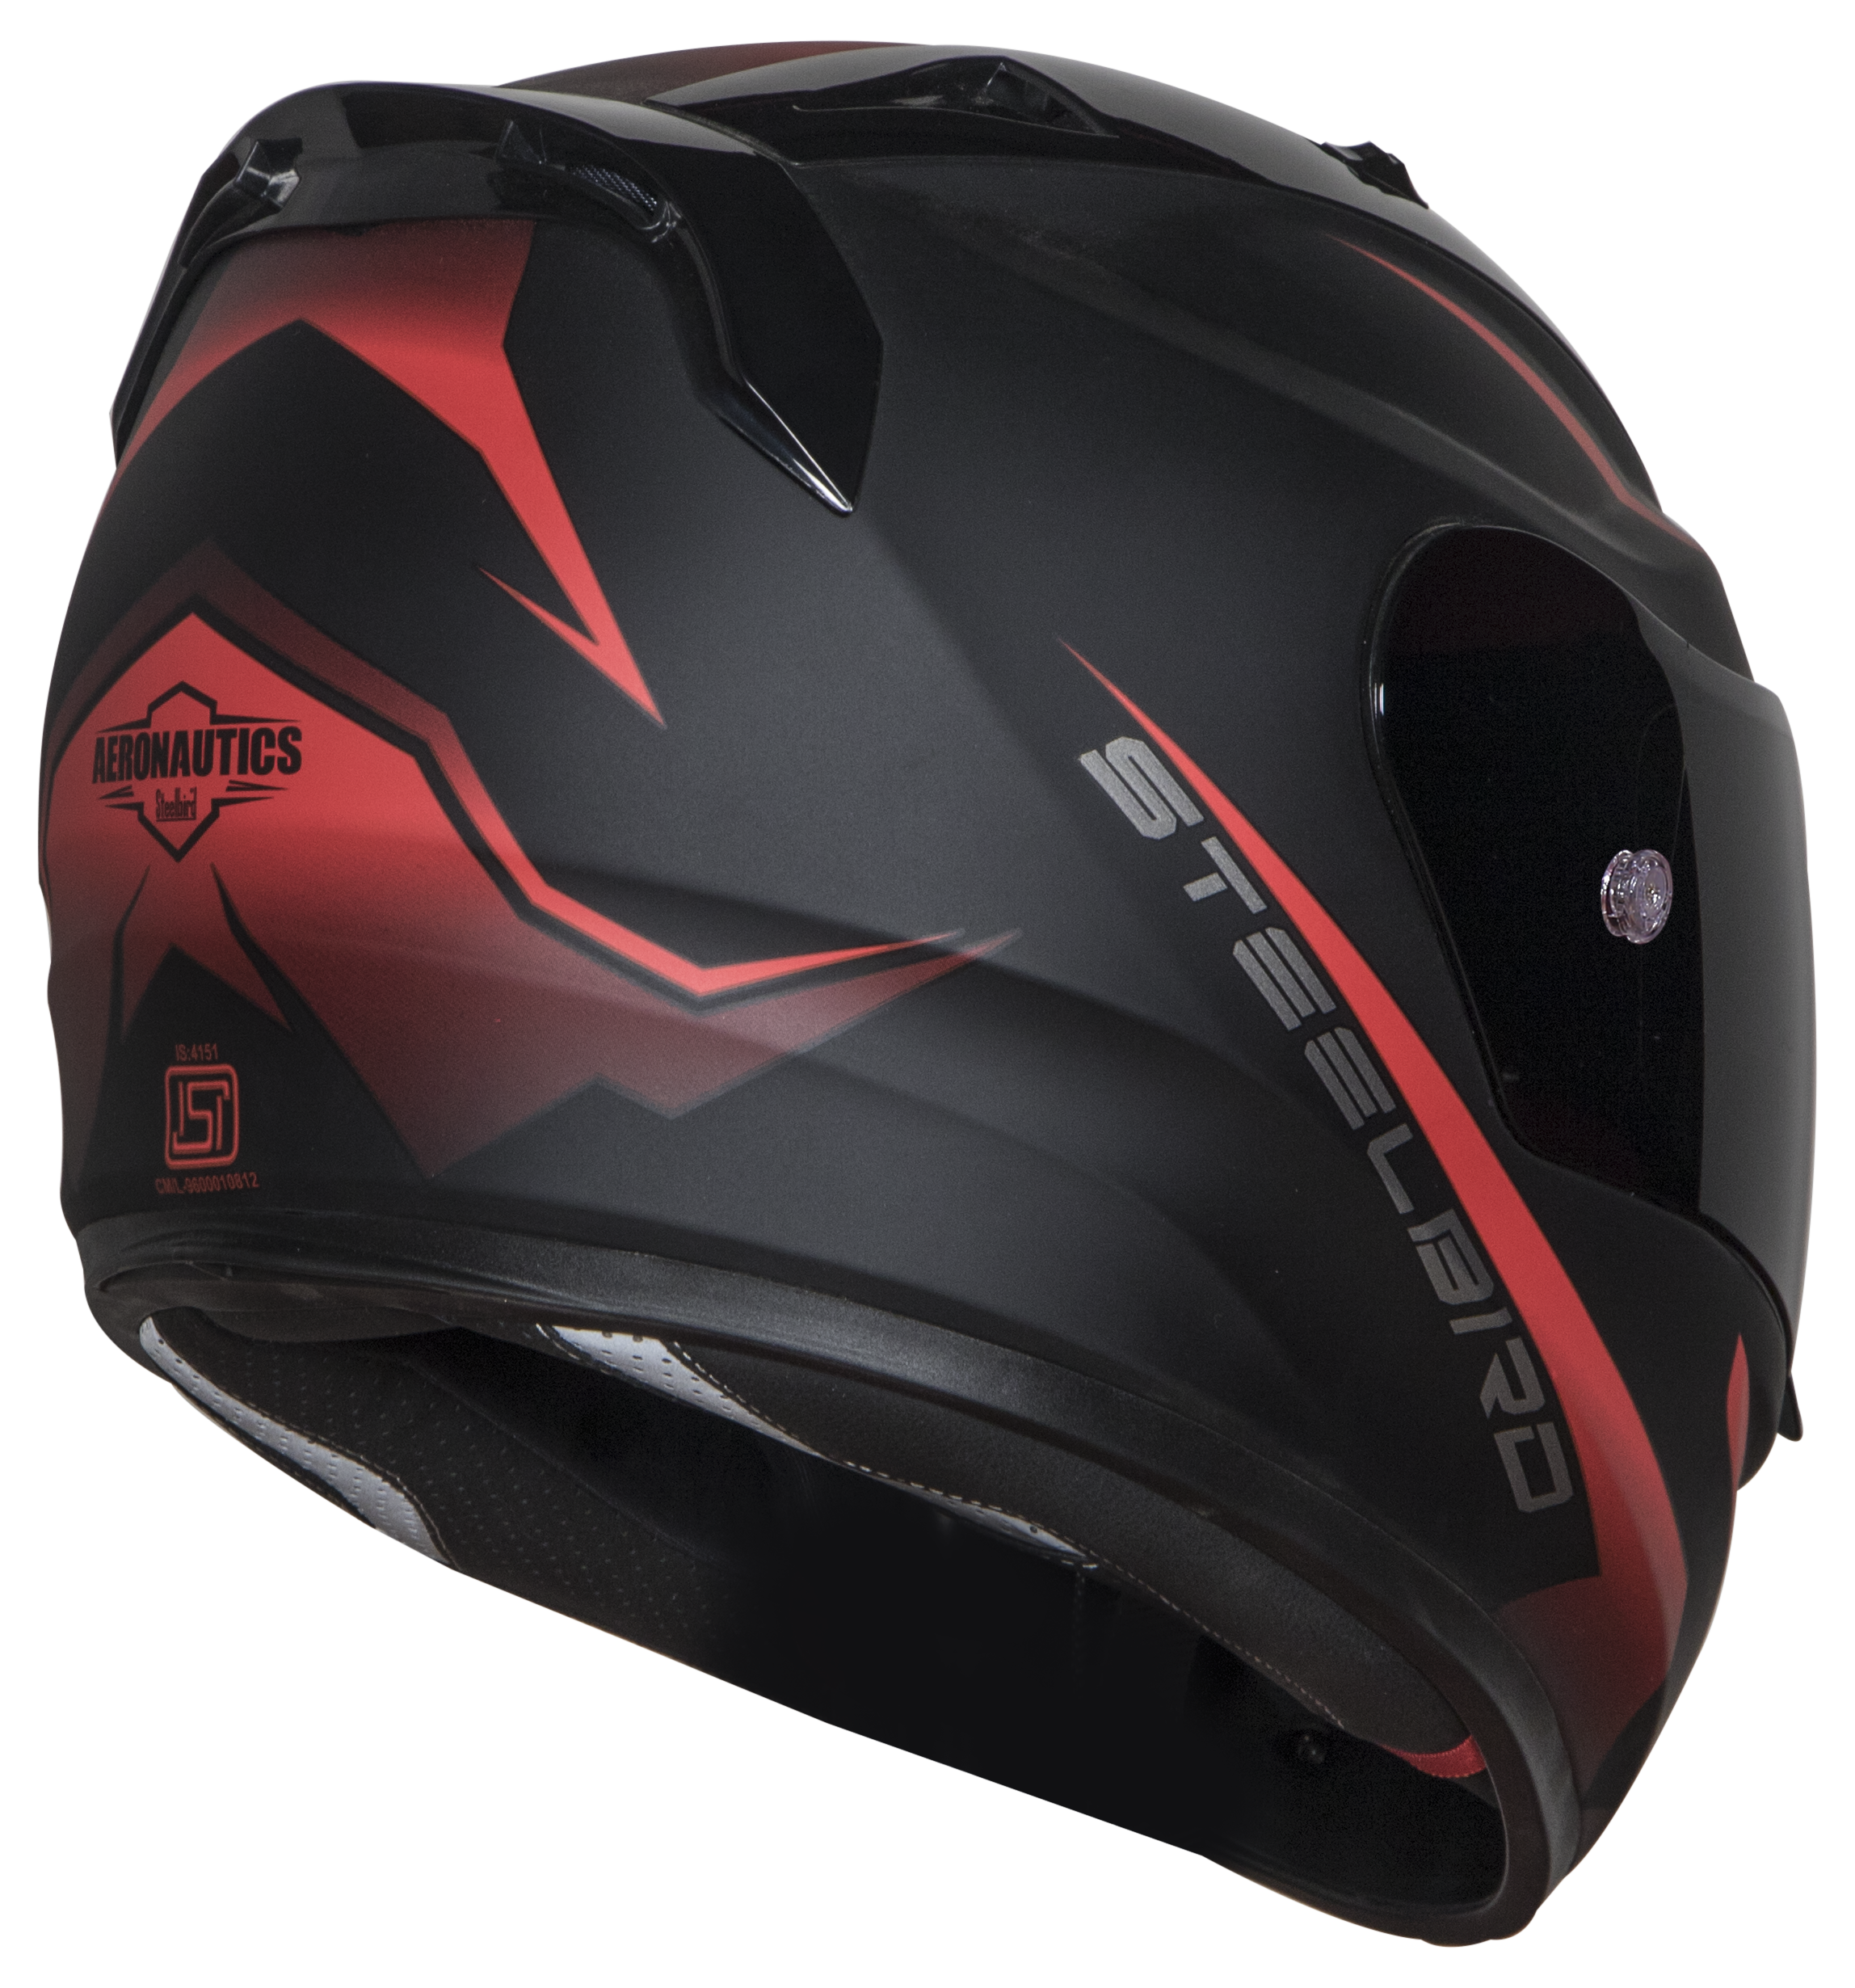 SA-1 WHIF Mat Black/Red (Fitted With Clear Visor Extra Anti-Fog Shield Chrome Gold Visor Free)